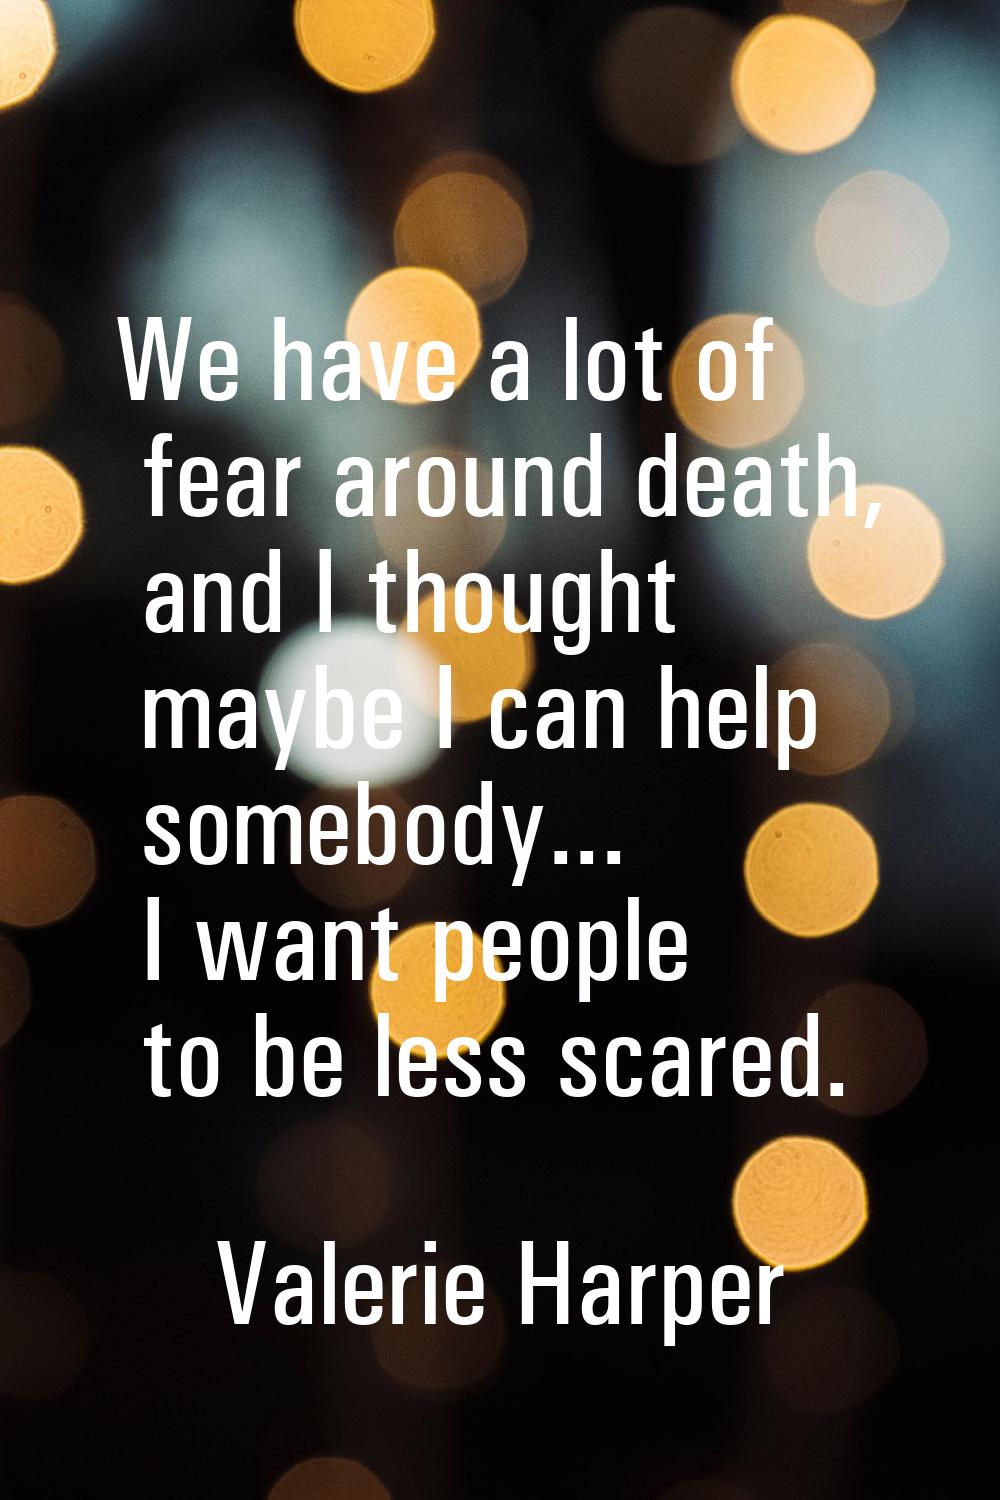 We have a lot of fear around death, and I thought maybe I can help somebody... I want people to be 